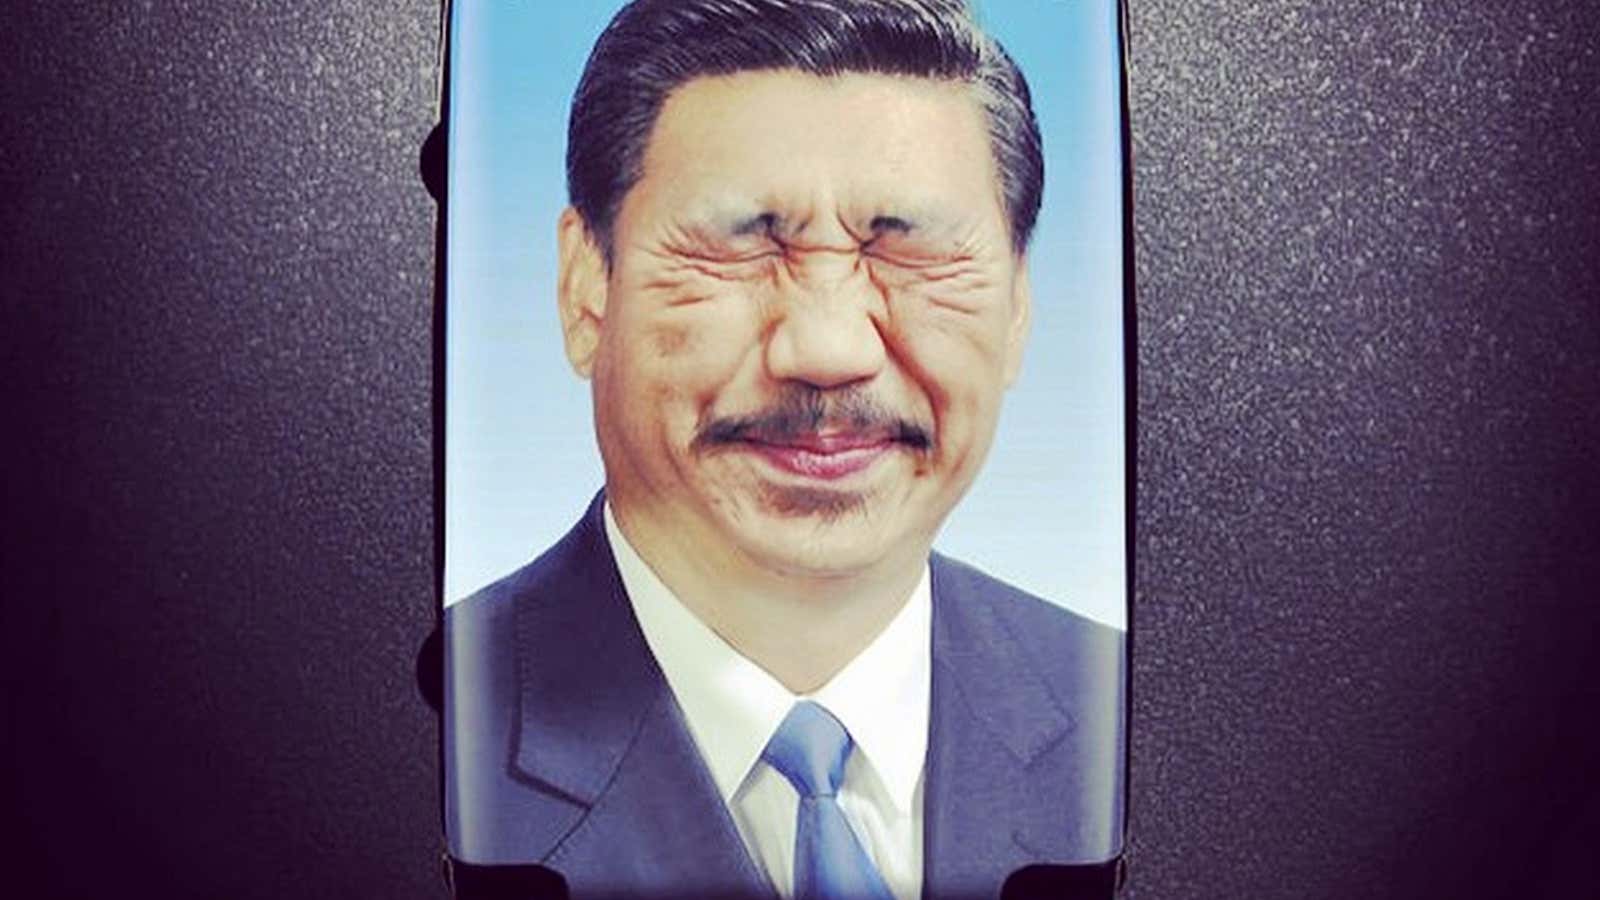 A Shanghai artist has been detained for comparing China’s president to Hitler